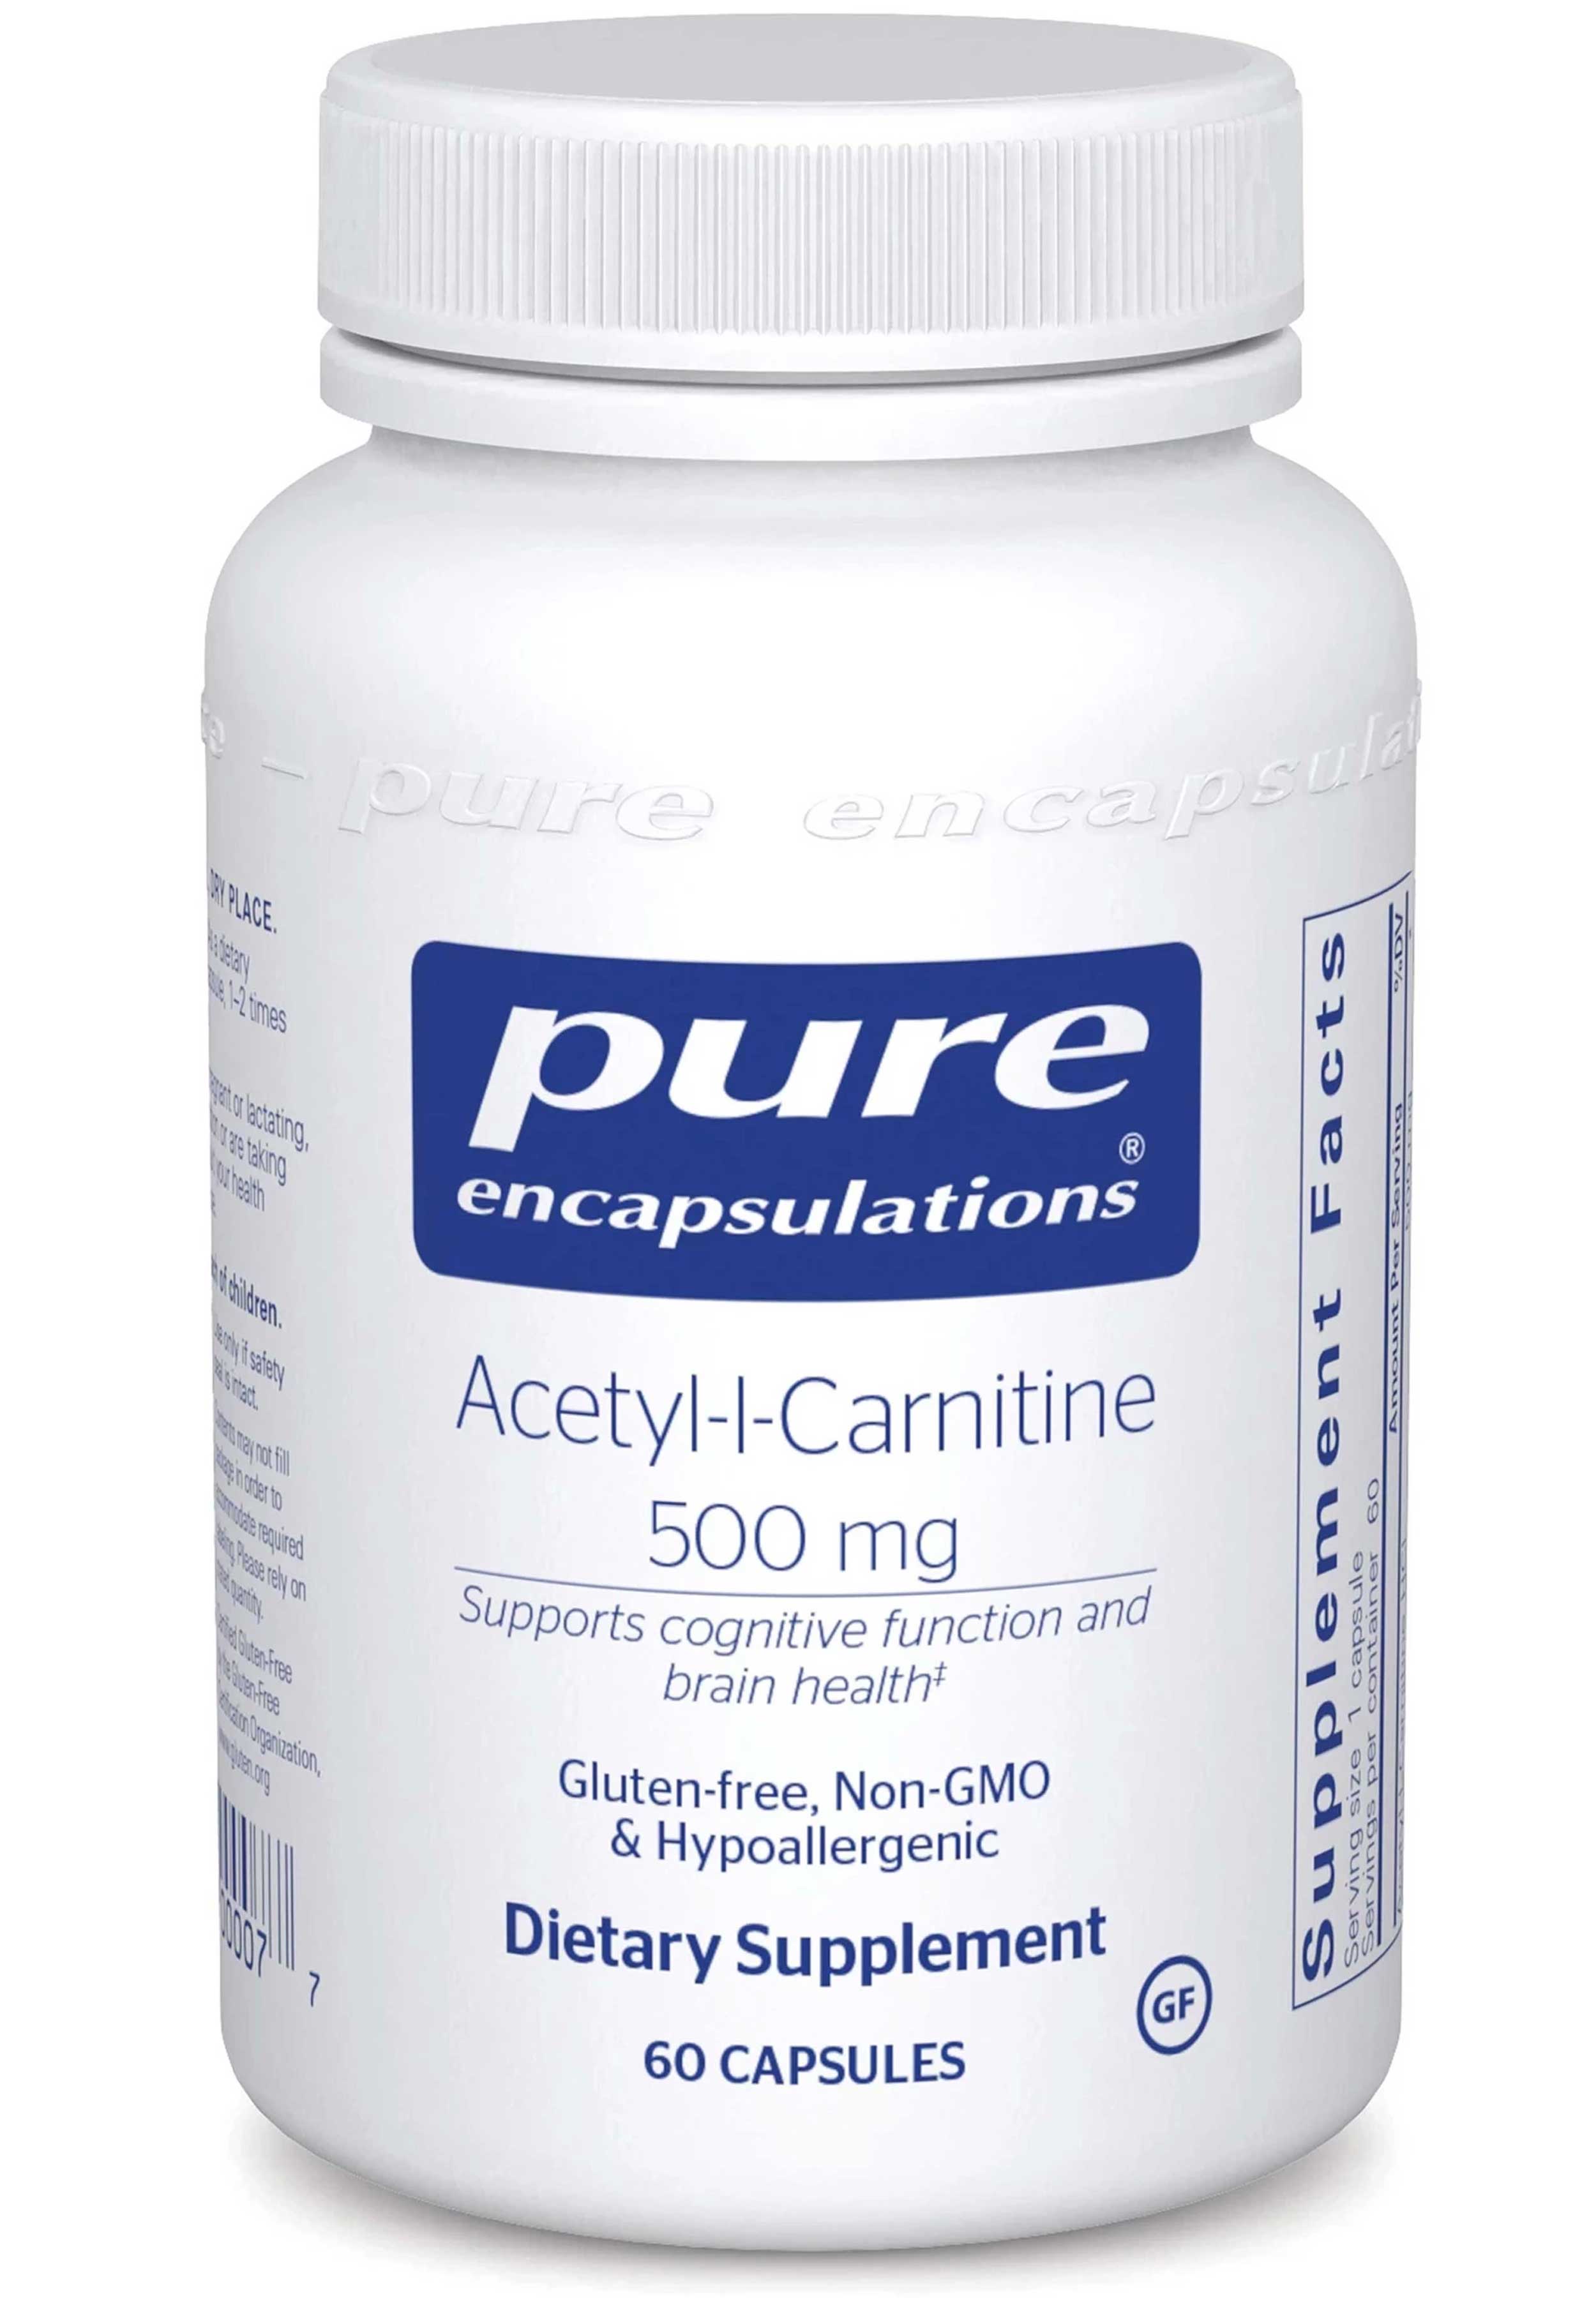 Pure Encapsulations Acetyl-l-Carnitine 500mg